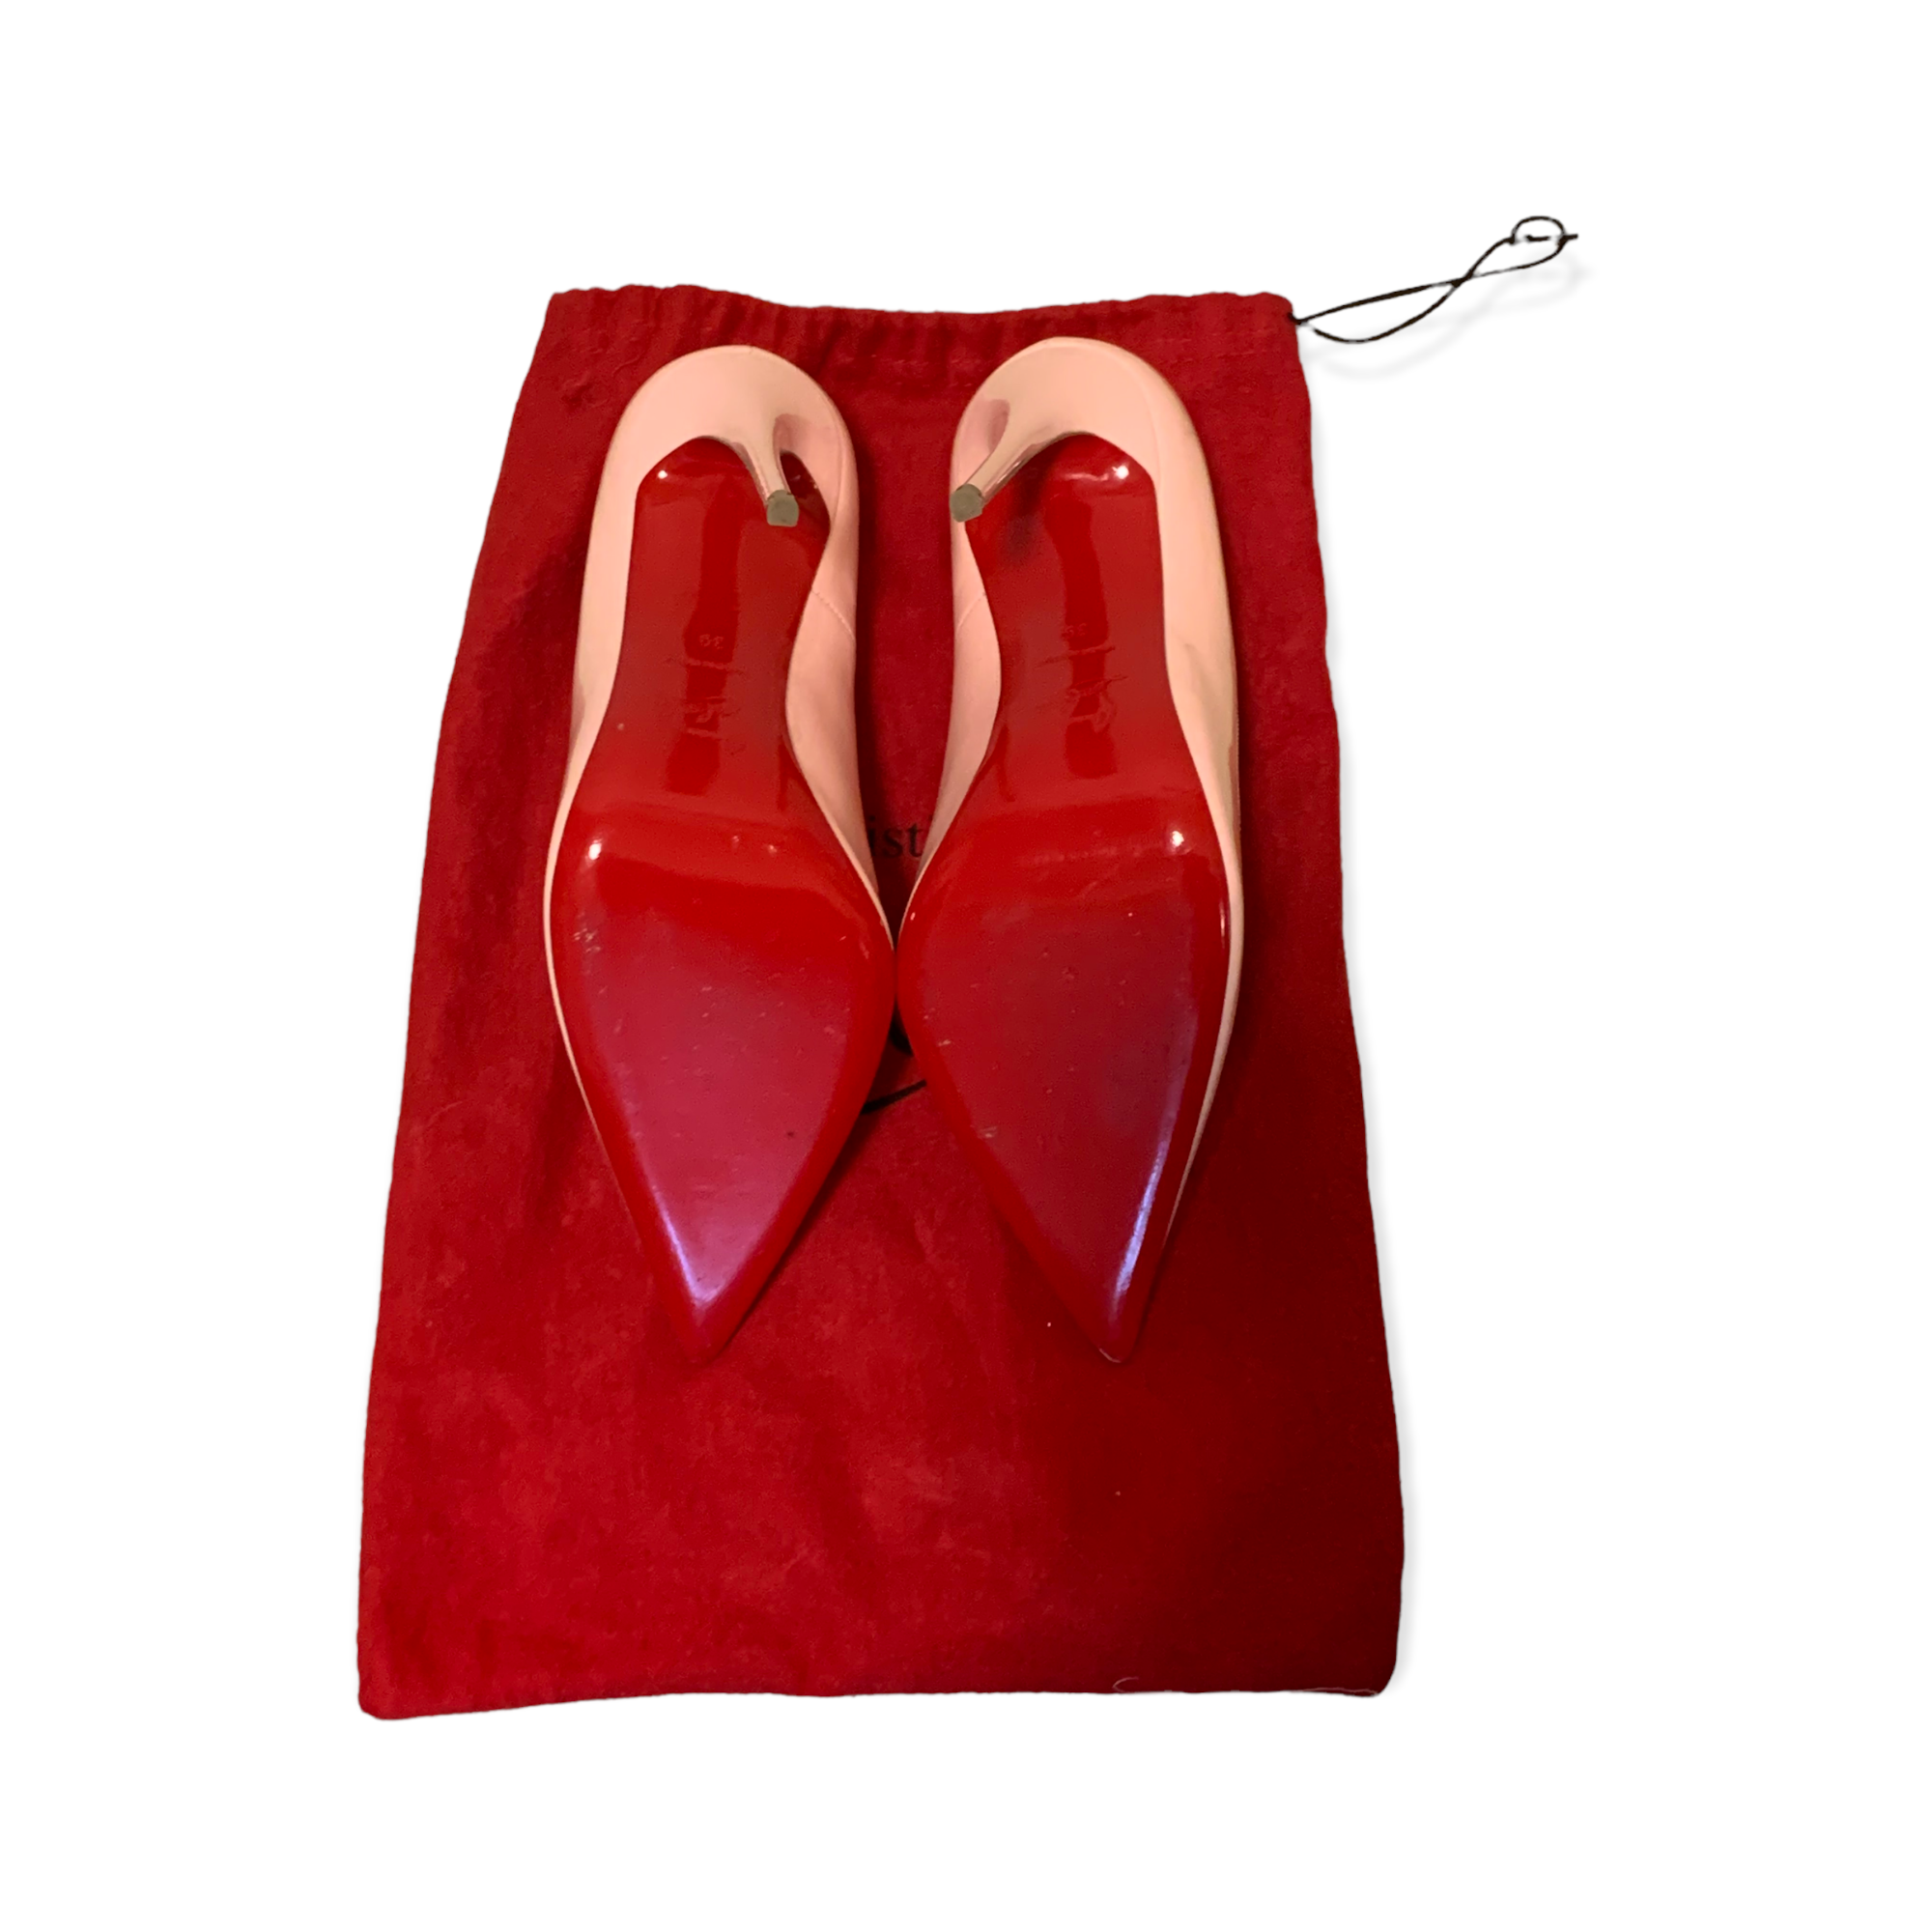 Christian Louboutin red So Kate Patent Leather Pumps 120